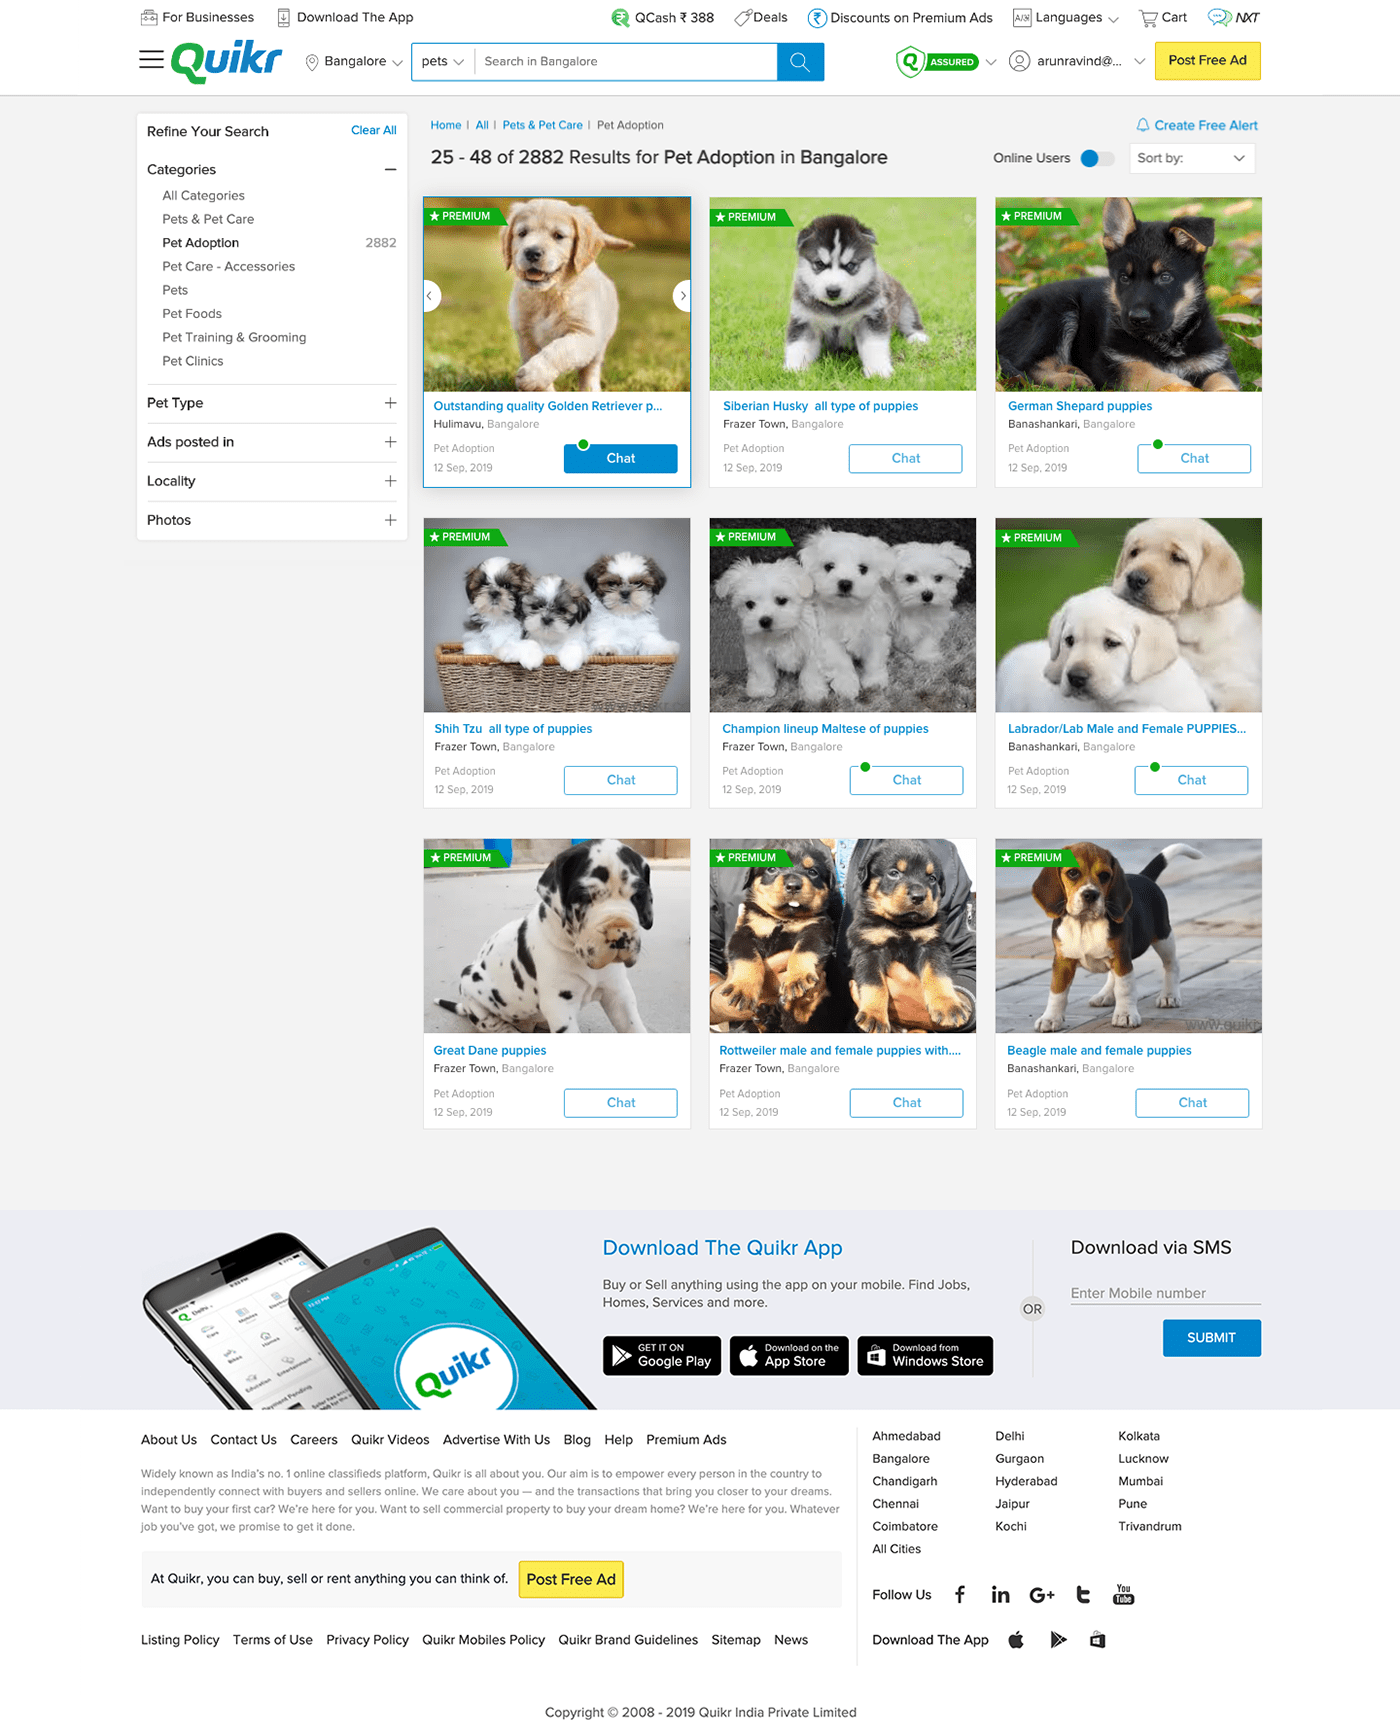 Find Pets & Pets care - Search and Browse to grid view on Behance